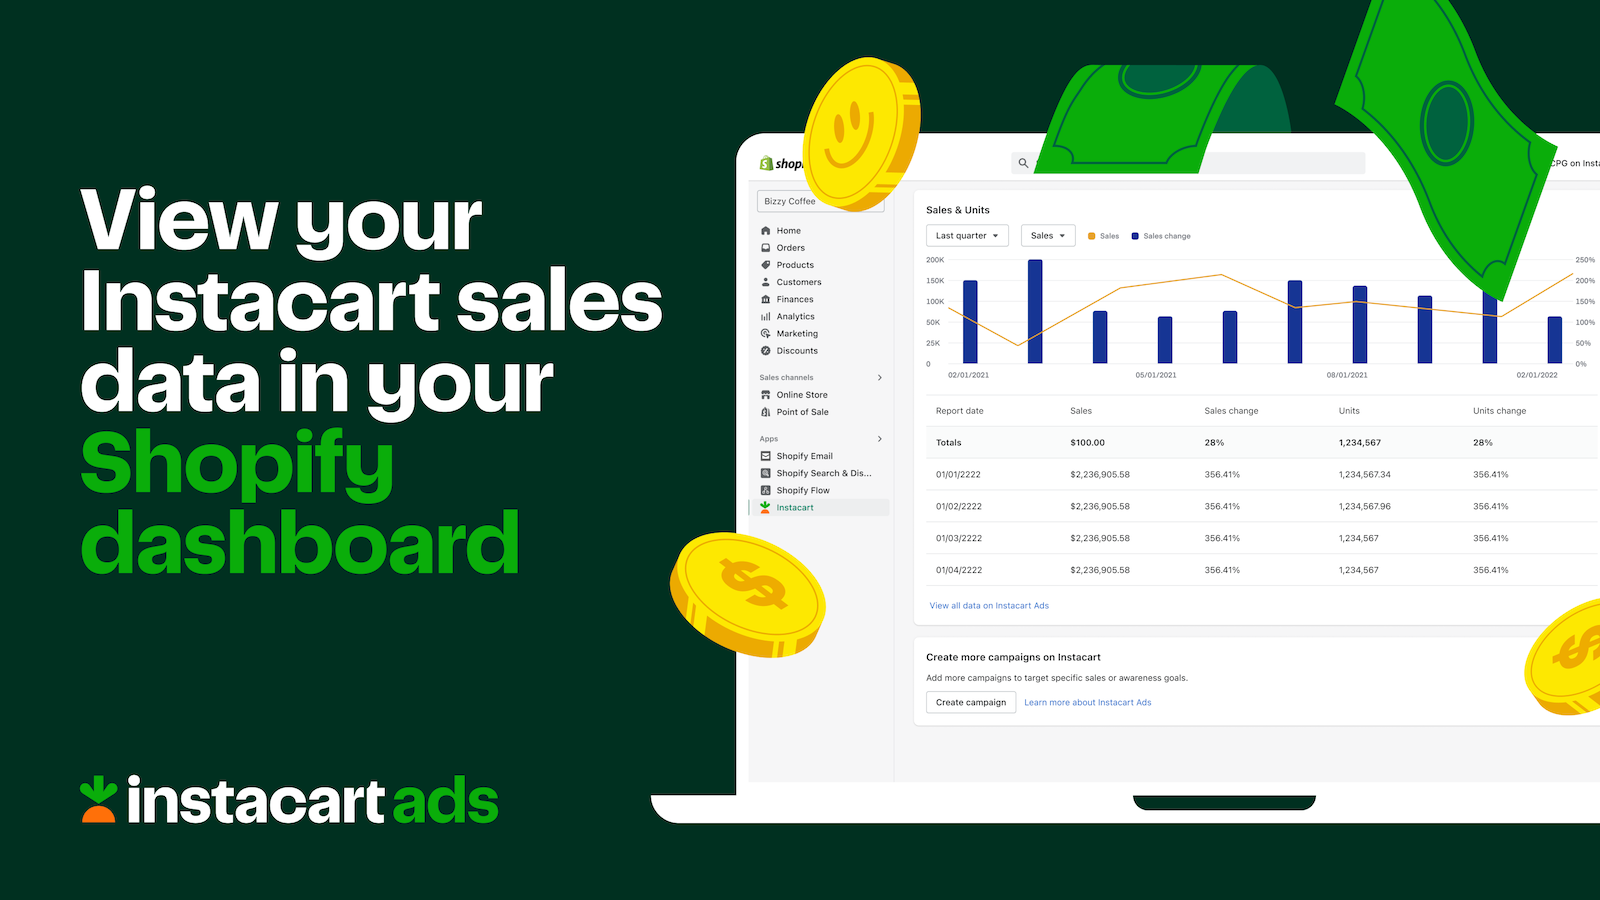 View Instacart sales data in your Shopify dashboard